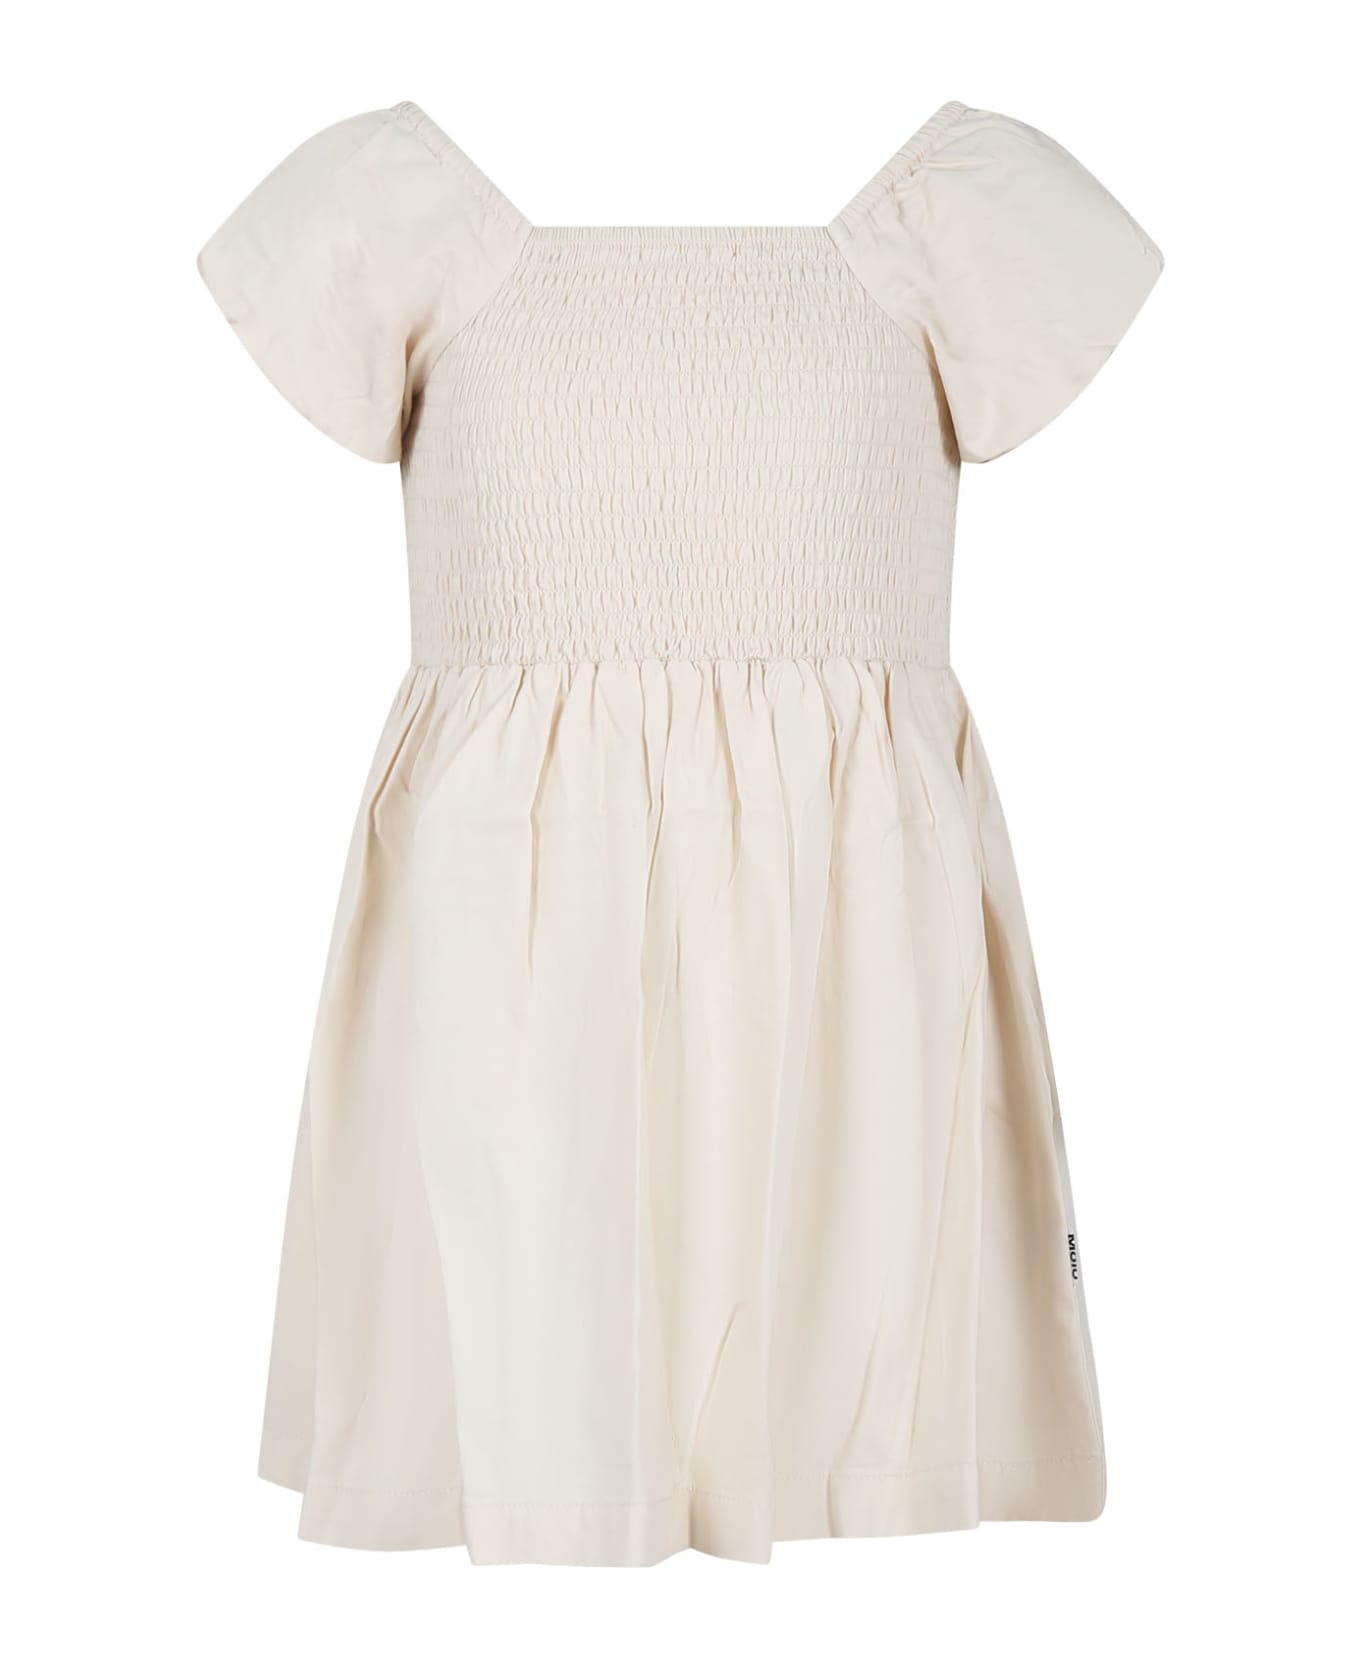 Molo Ivory Dress For Girl - Ivory